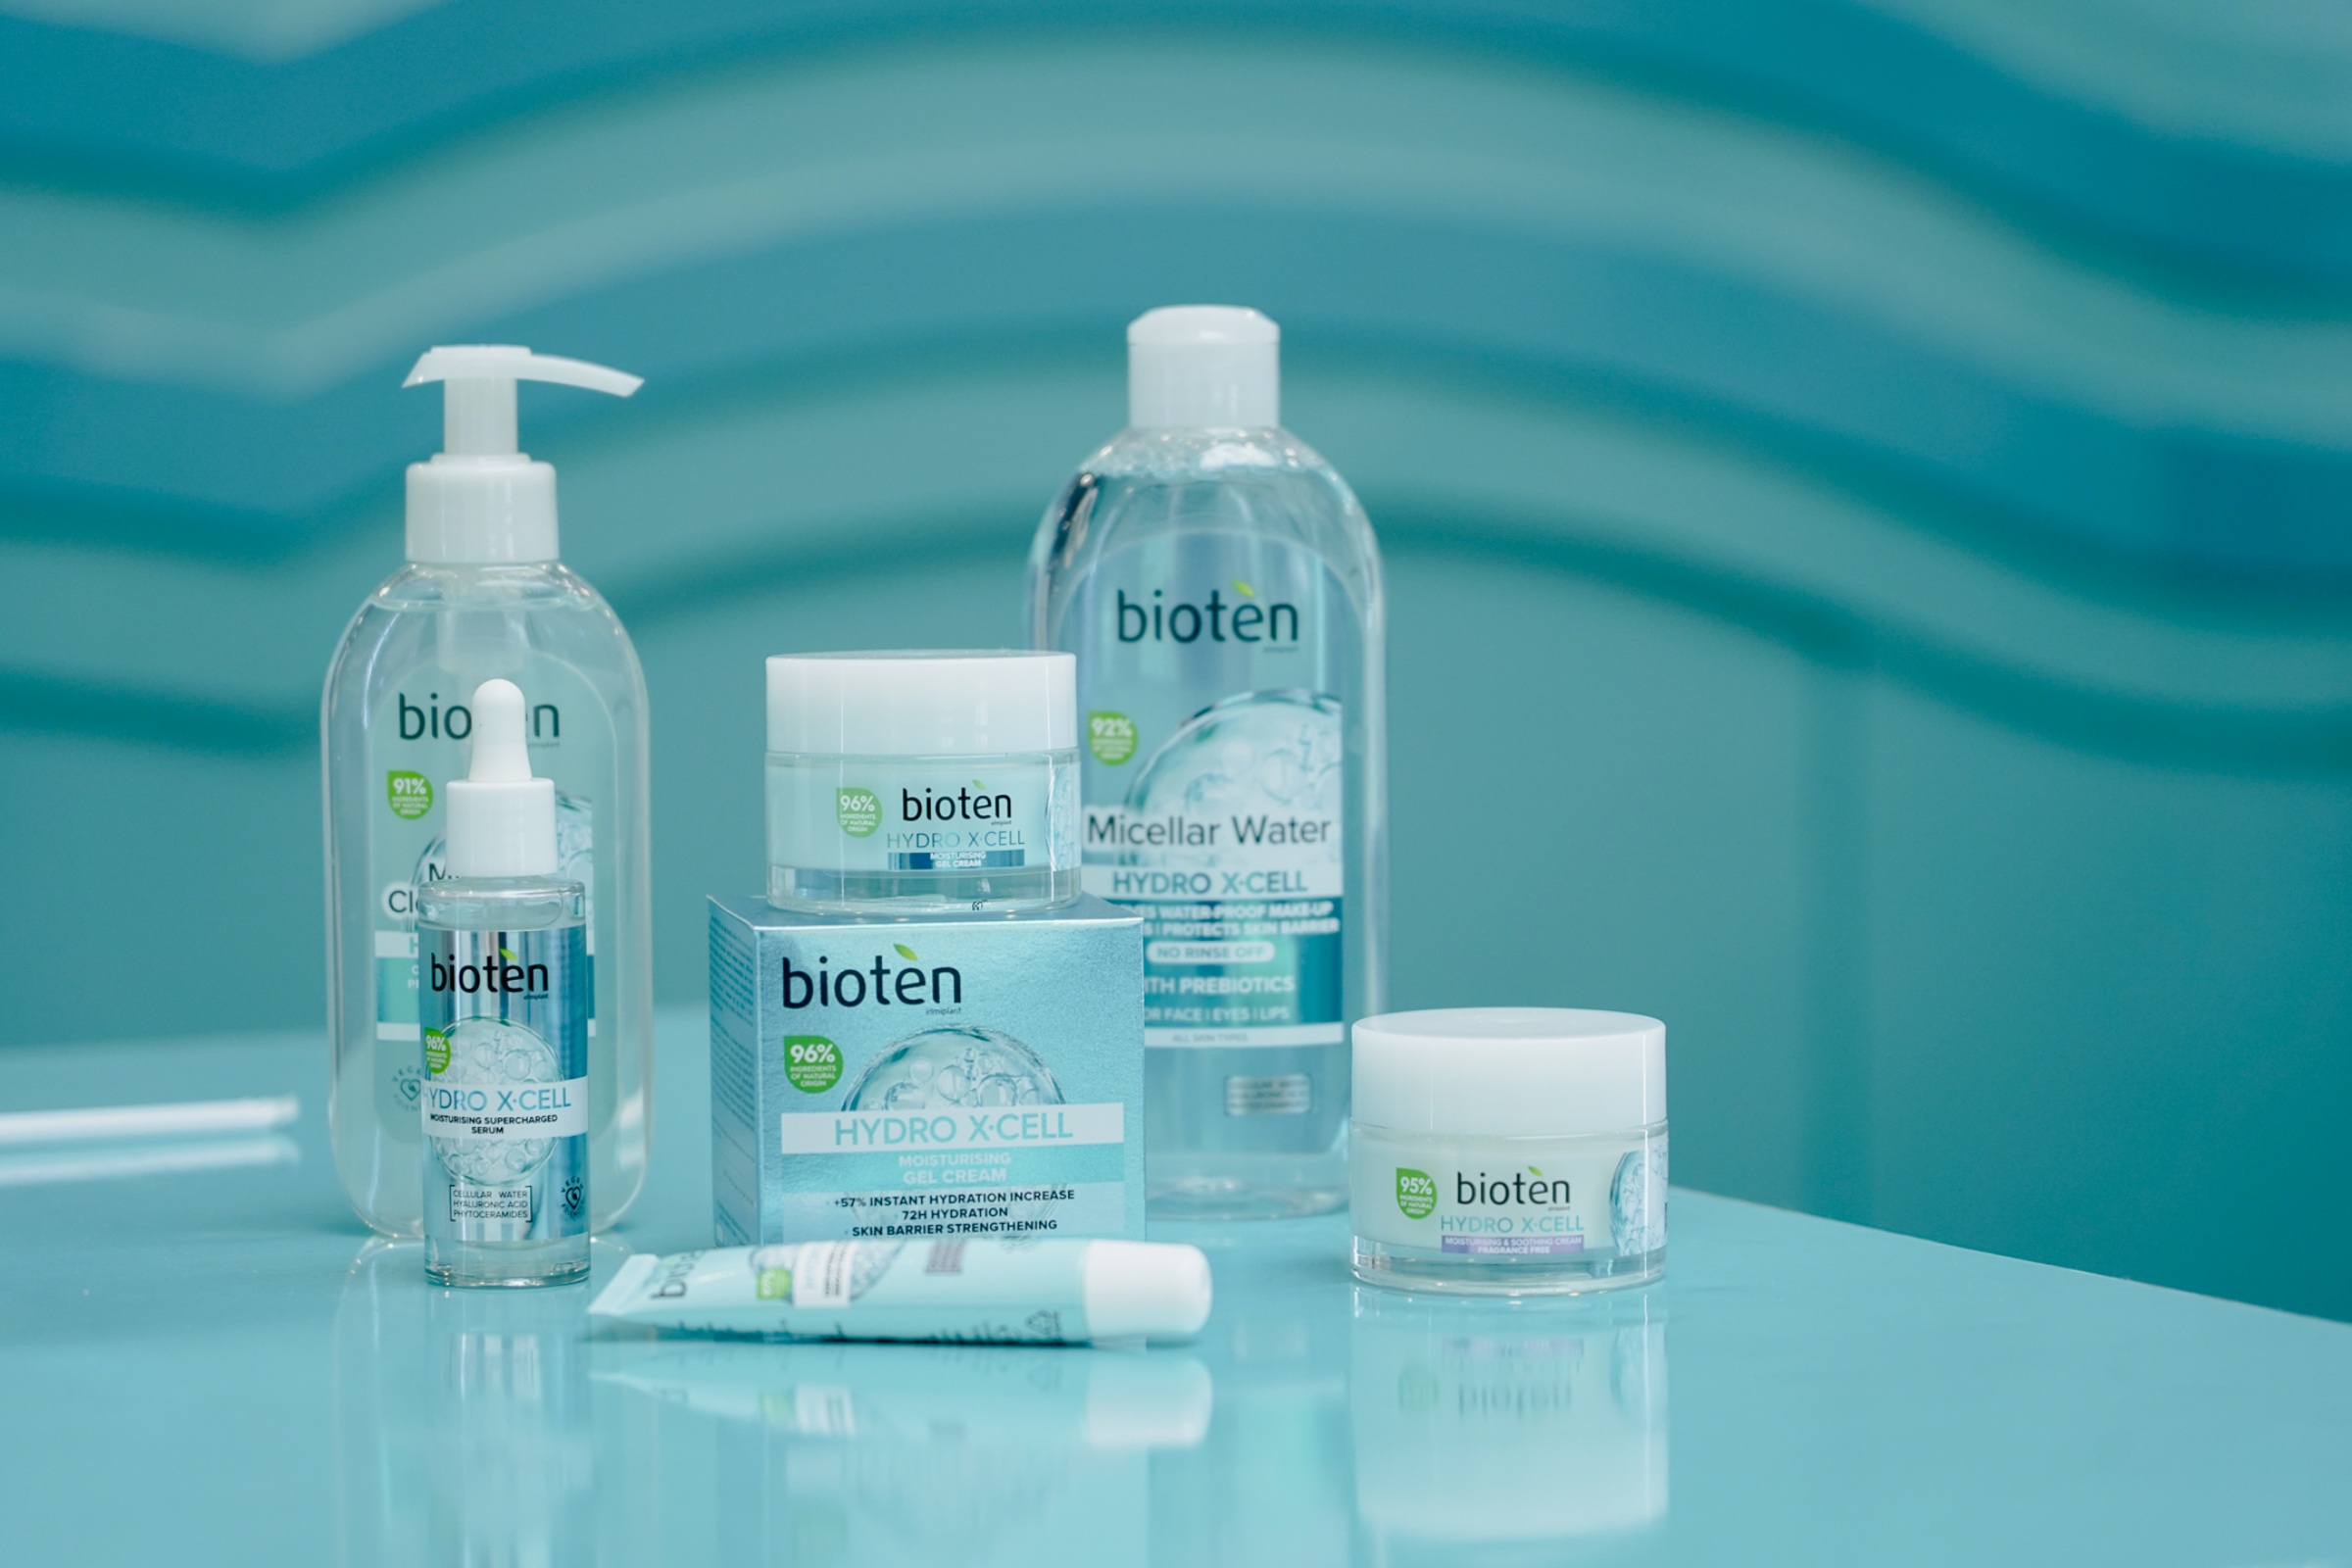 Bioten Hydro X-Cell collection